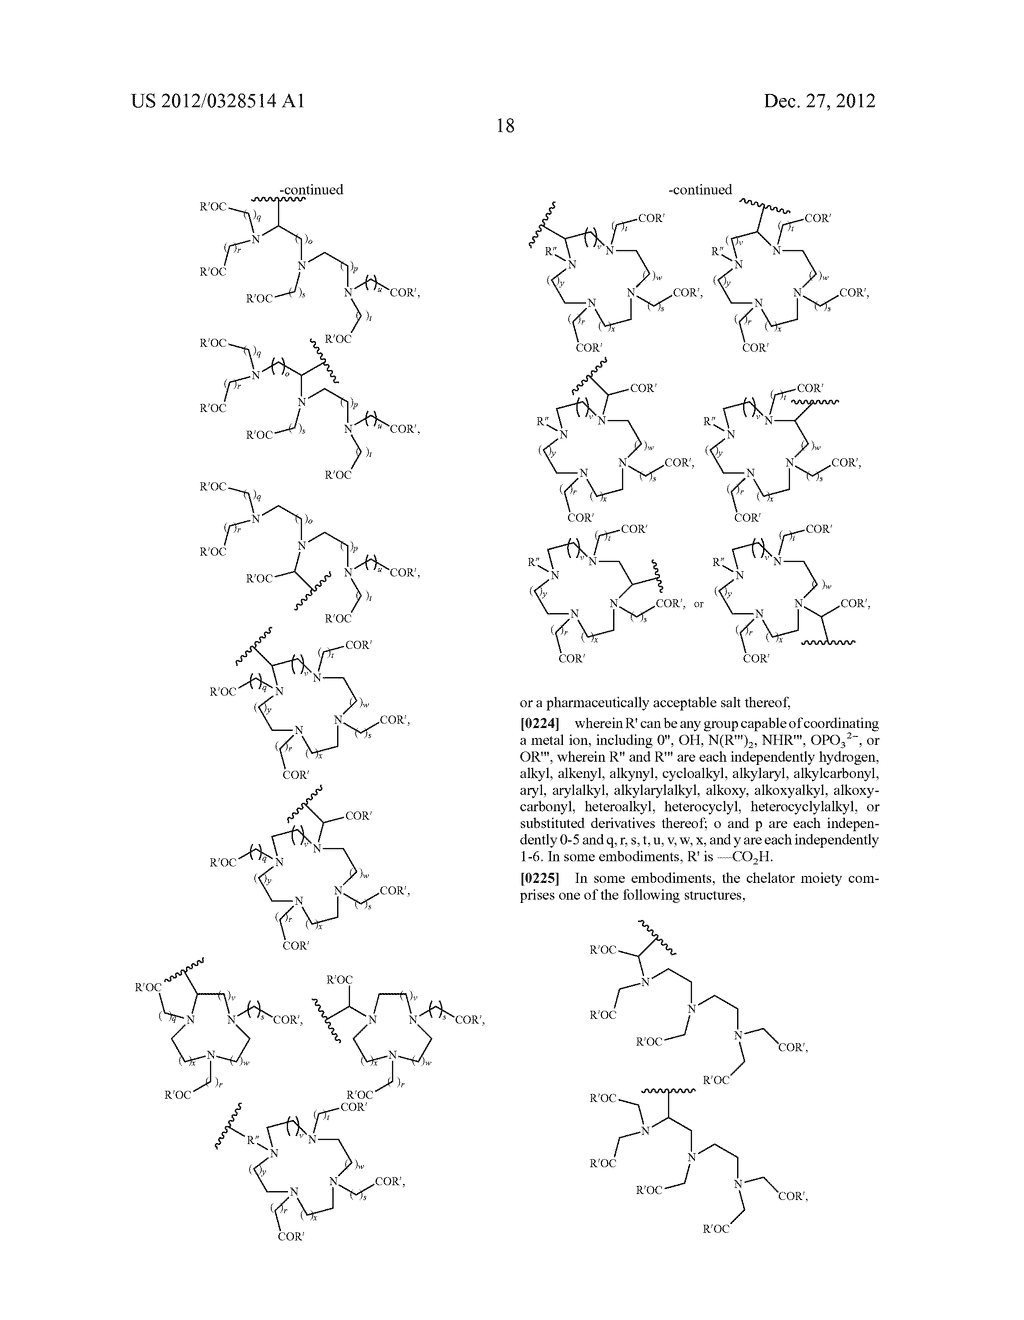 N-ALKOXYAMIDE CONJUGATES AS IMAGING AGENTS - diagram, schematic, and image 20